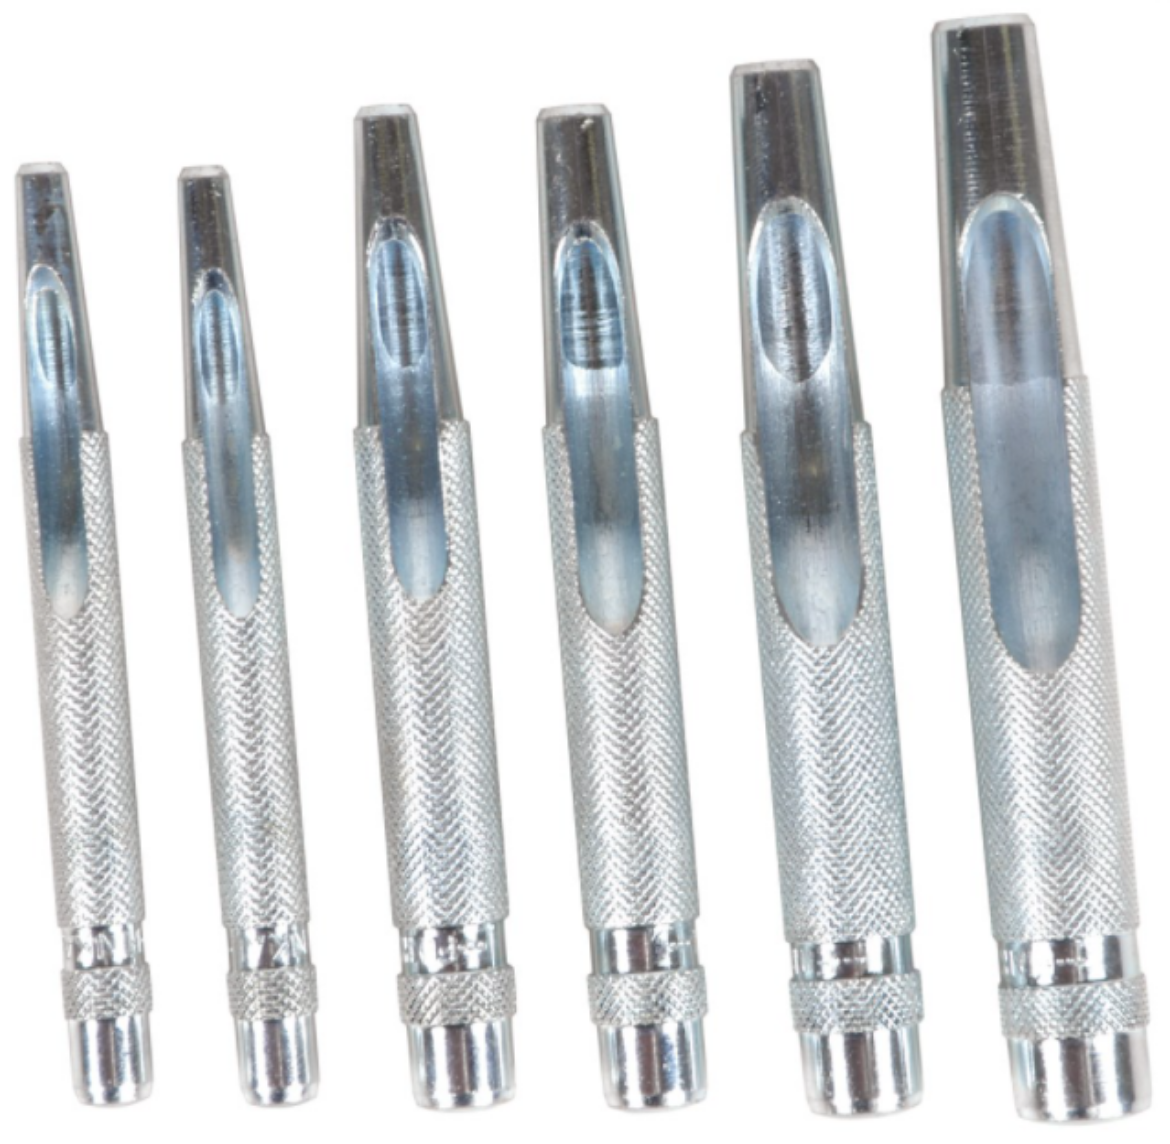 Picture of KINCROME PUNCH HOLLOW 6PC SET 5, 6.5, 8, 9.5, 12, 13mm (3/16, 1/4, 5/16, 3/8, 7/16, 1/2")